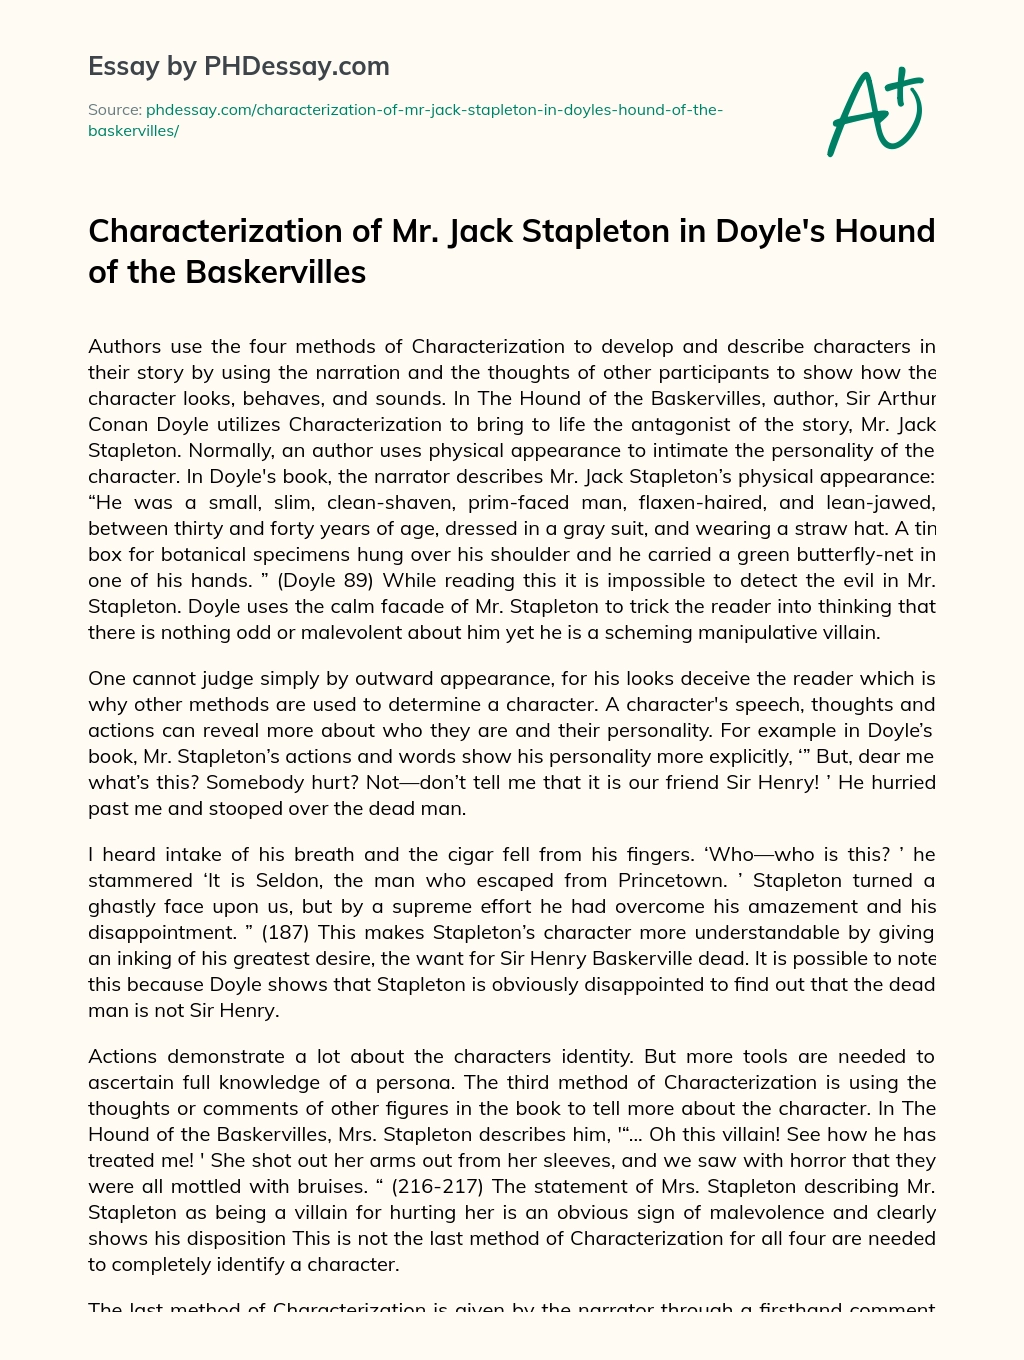 Characterization of Mr. Jack Stapleton in Doyle’s Hound of the Baskervilles essay